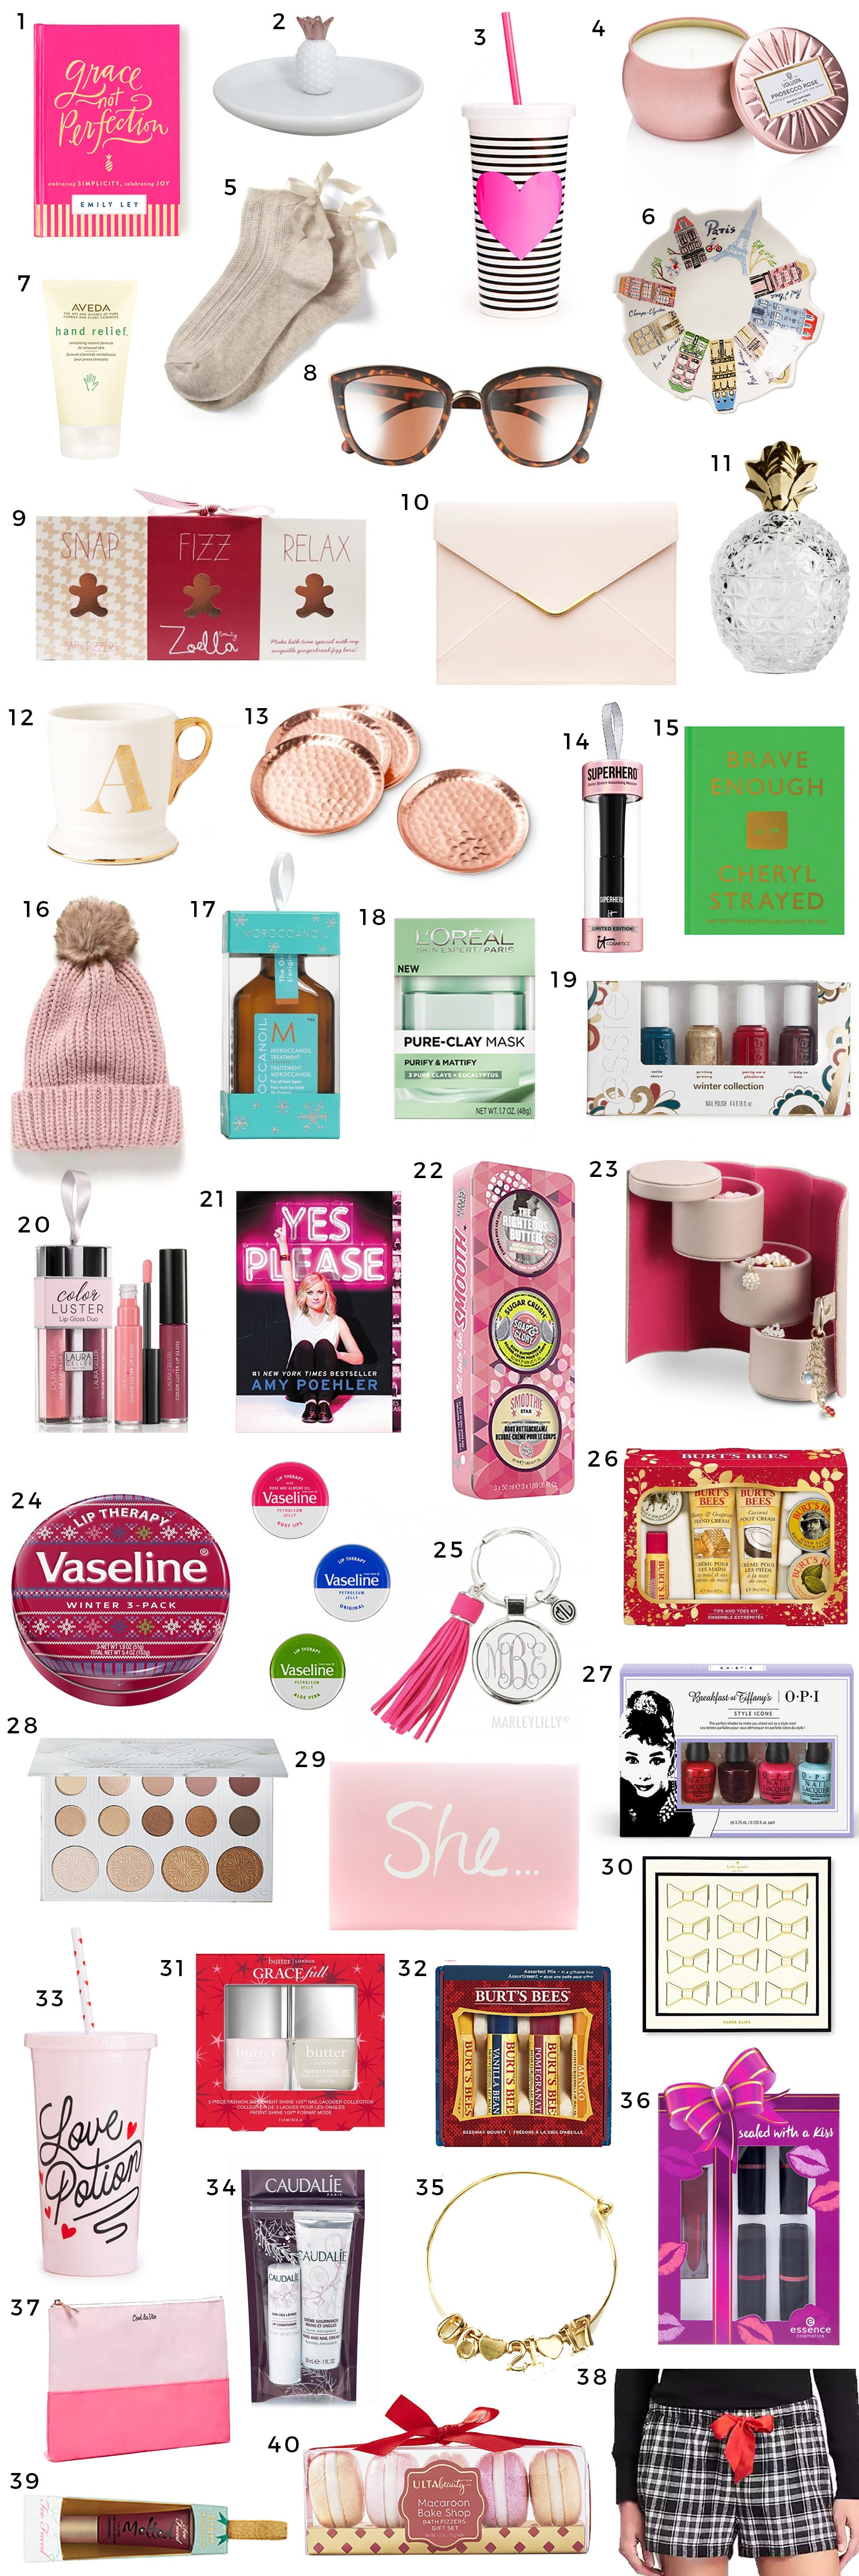 Holiday Gift Ideas For Women
 The Best Christmas Gift Ideas for Women Under $15